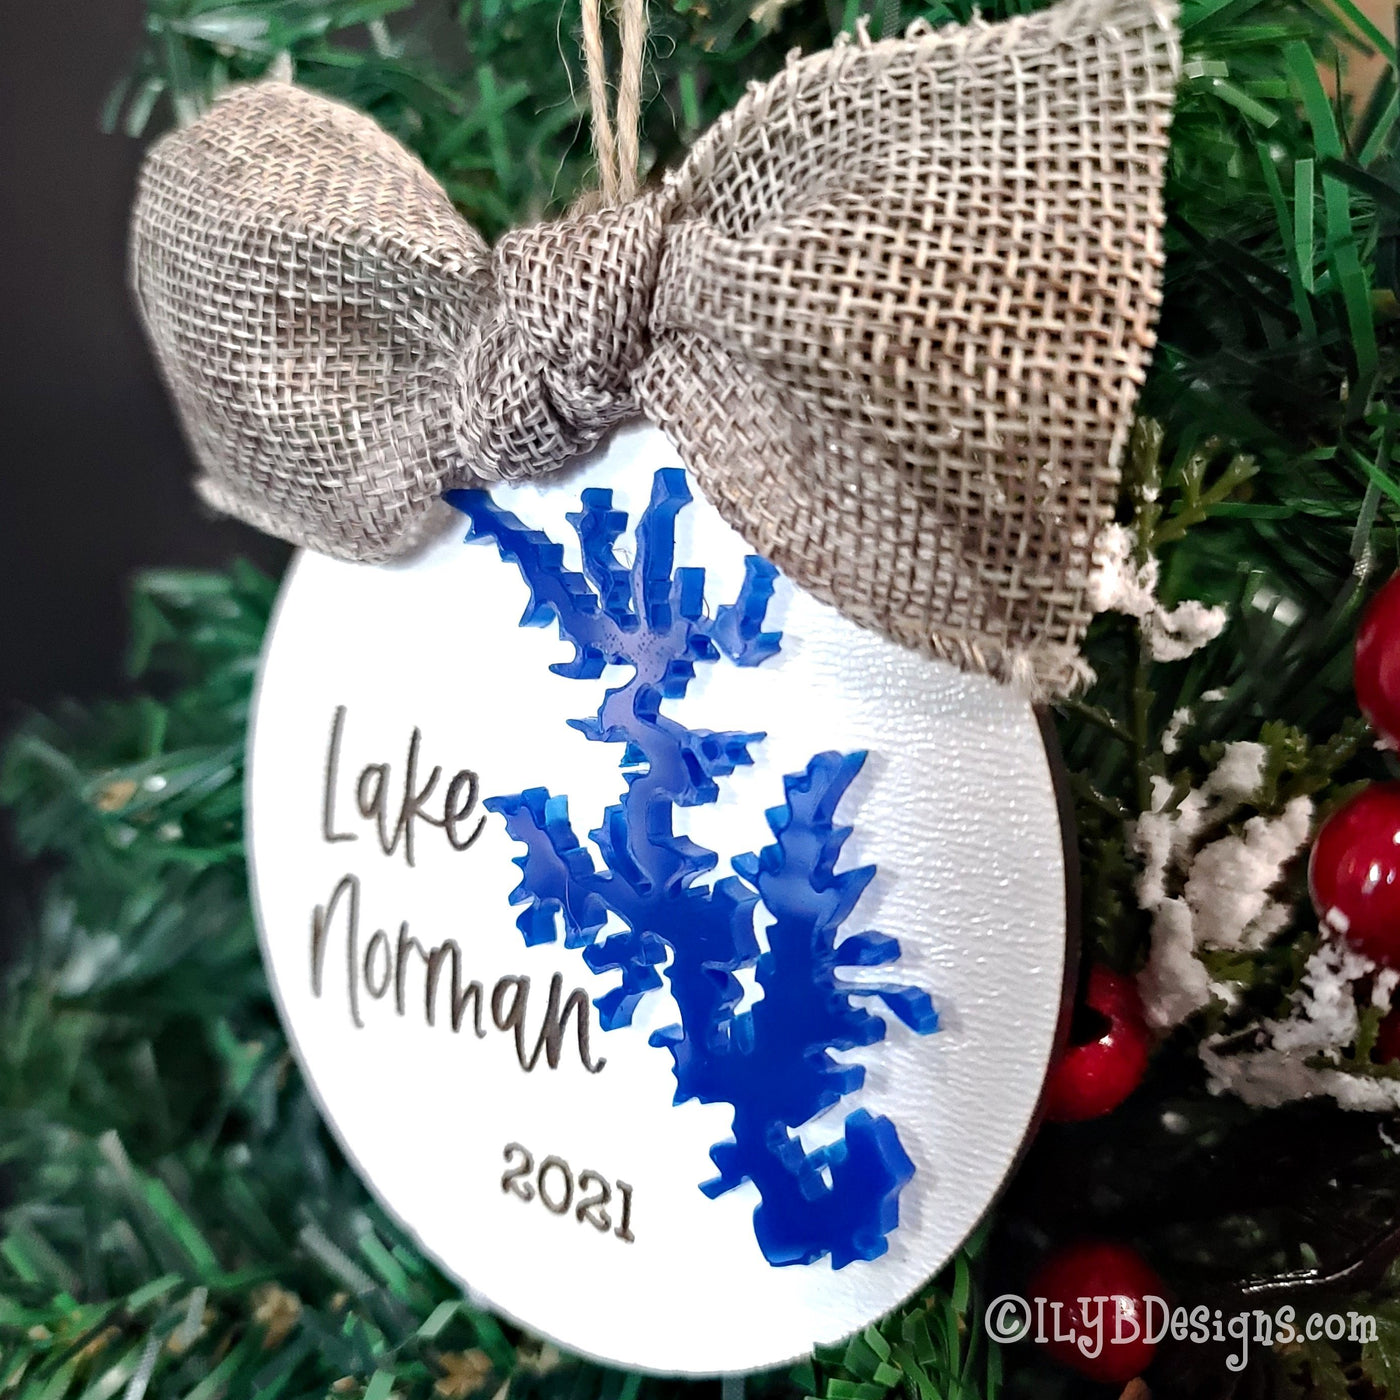 Lake Norman Lake Silhouette Christmas Ornament | Personalized Laser Cut Wood Ornament